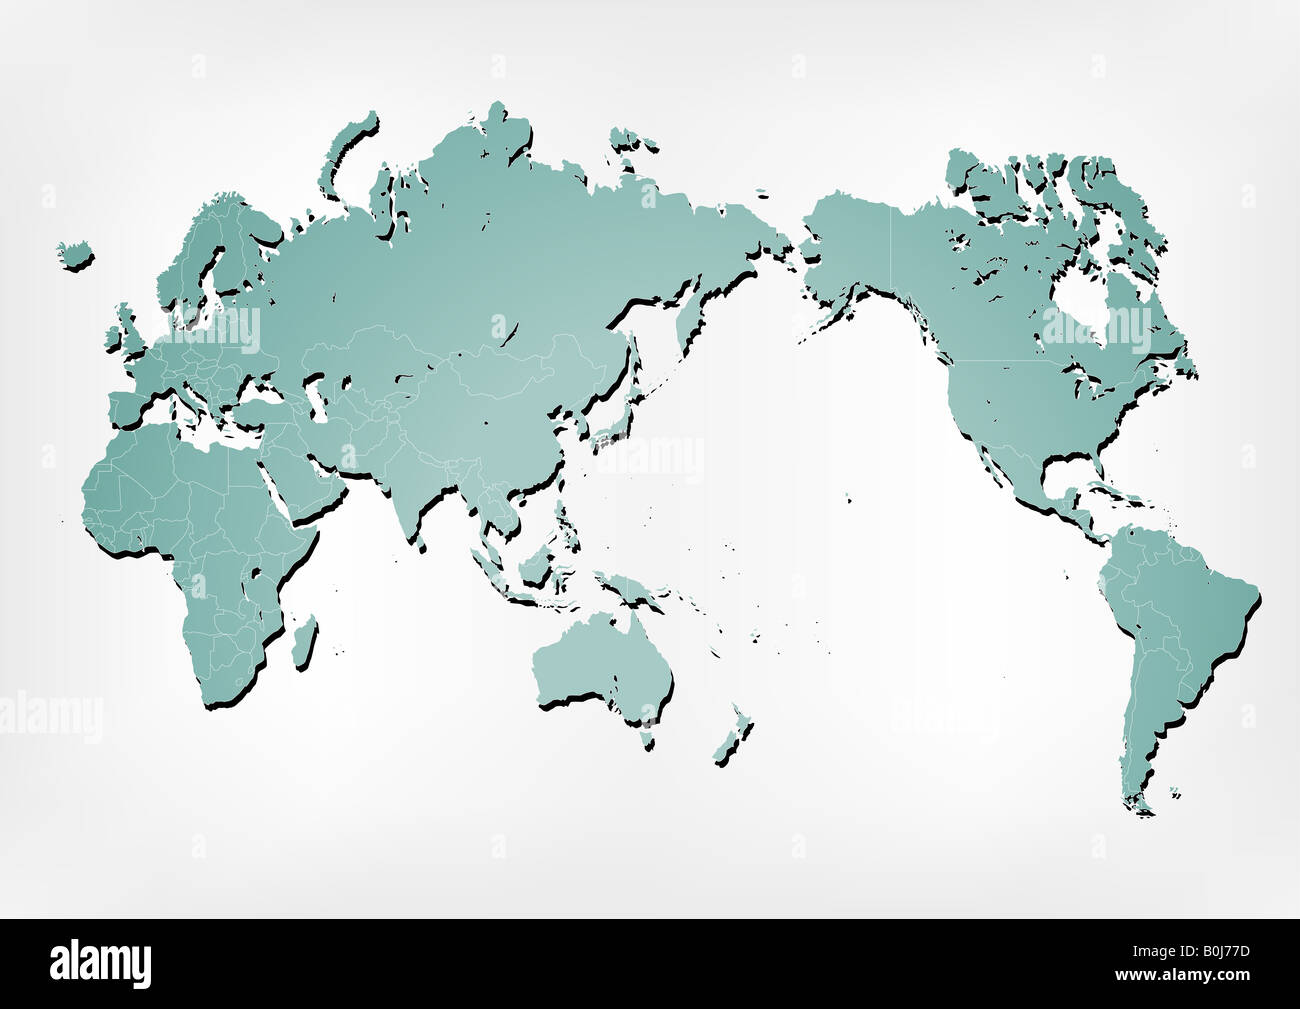 Stroked world map illustration with nation borders on a gradient background with a simple shadow Stock Photo